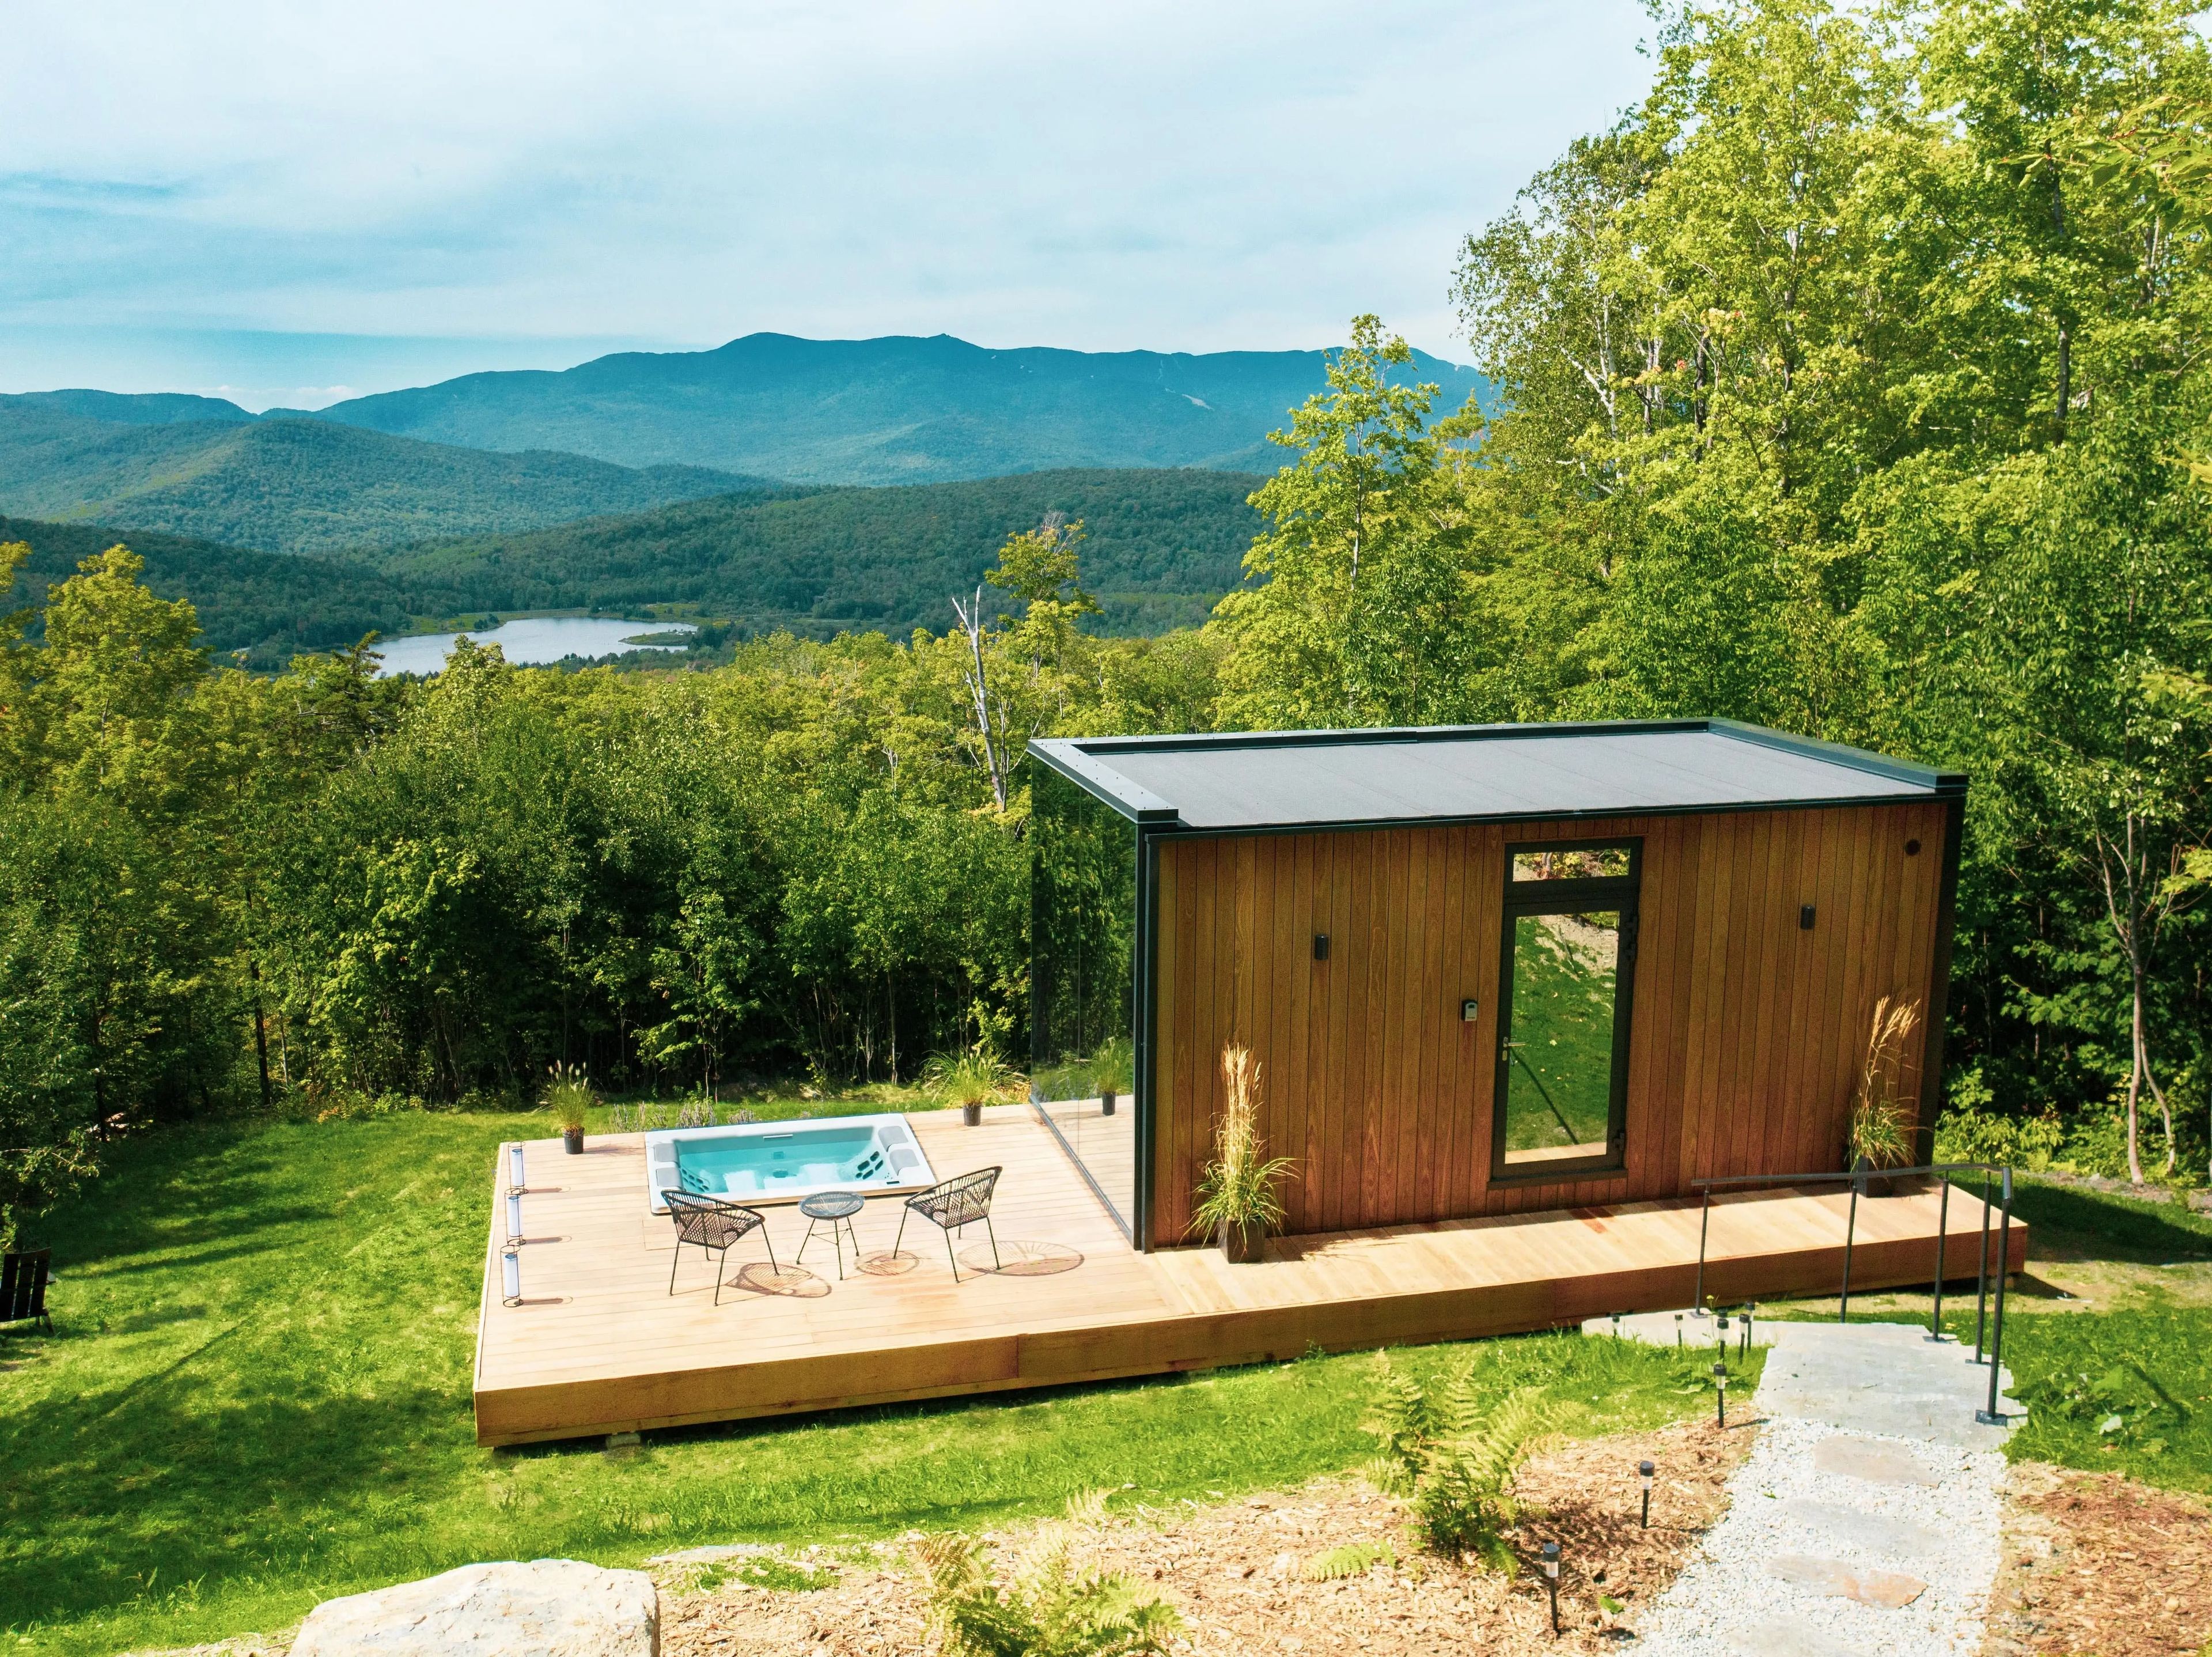 Tiny glass Airbnb house in Vermont